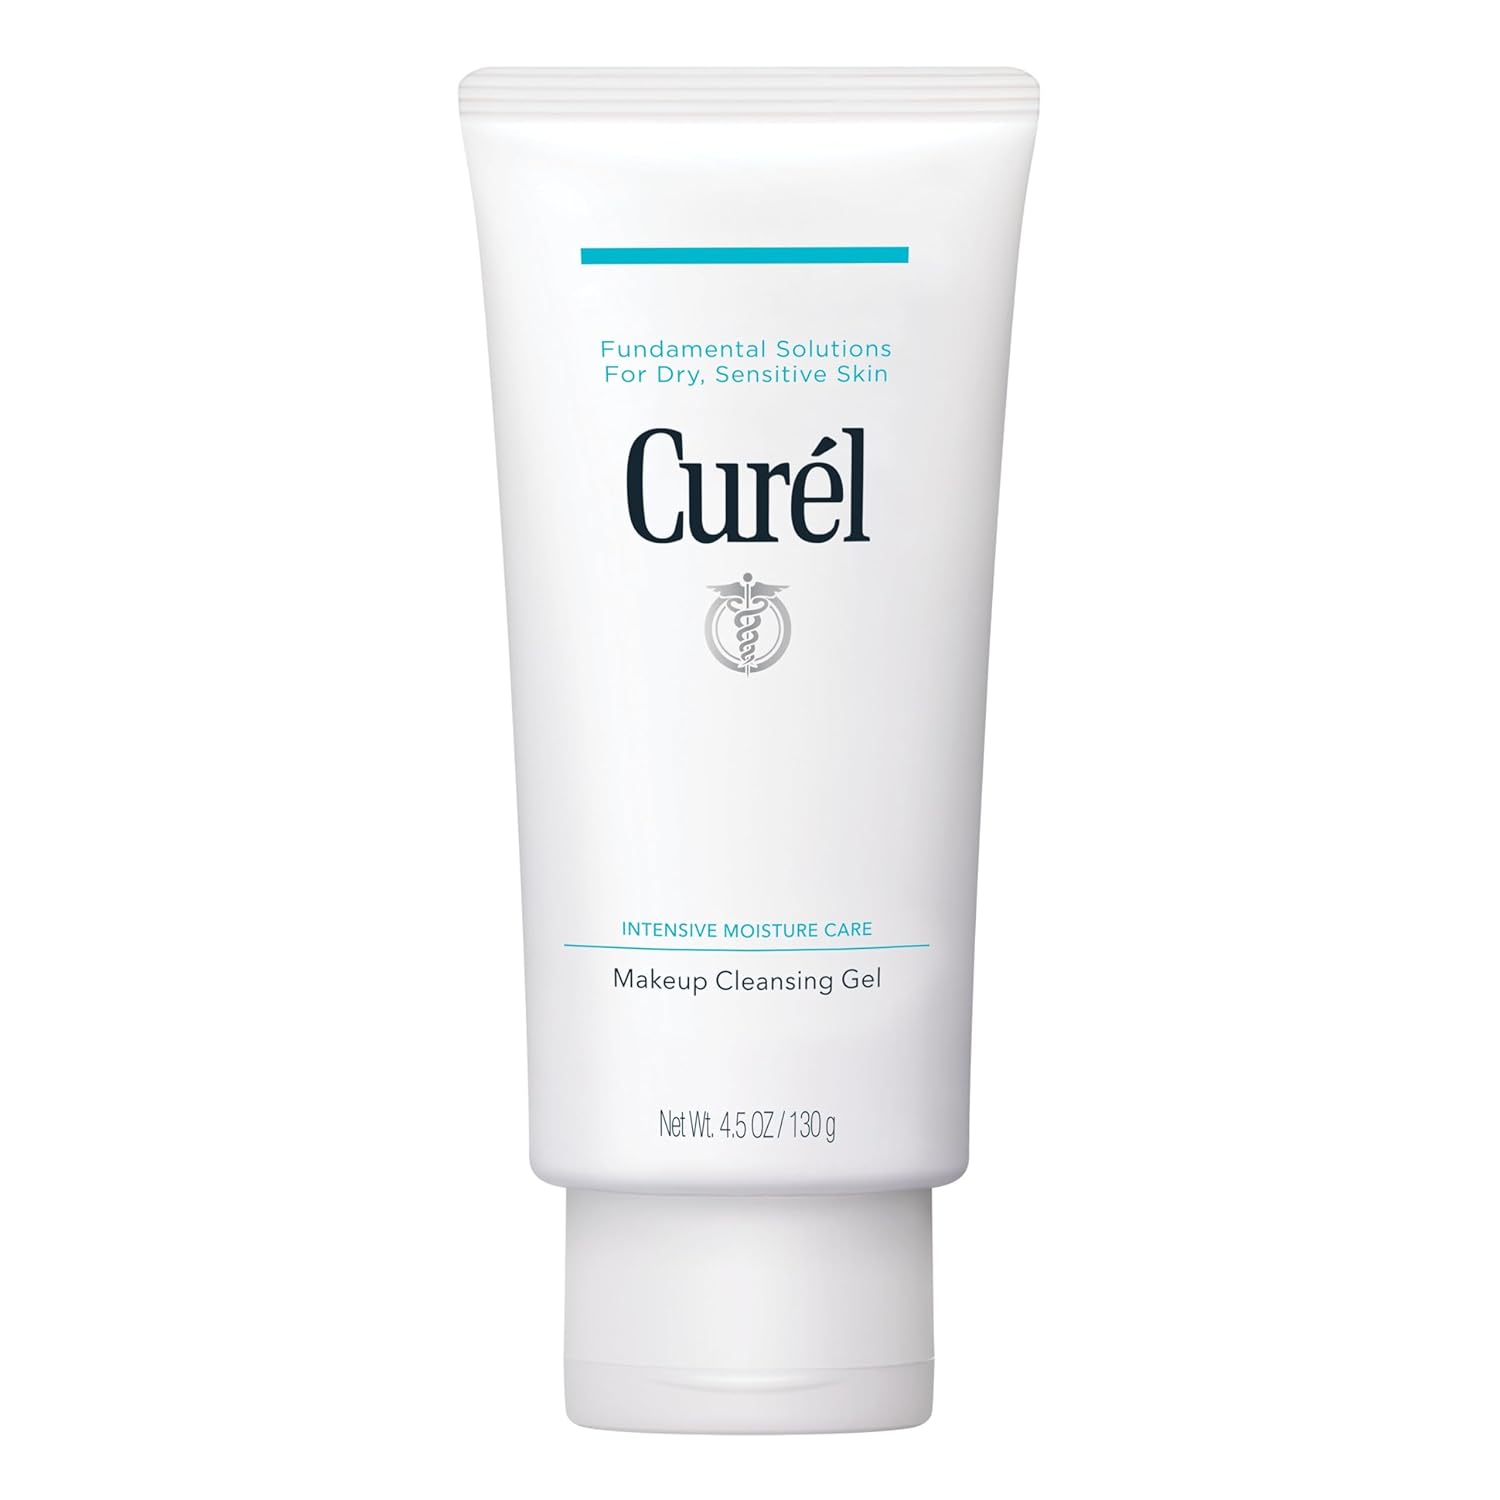 Curel Japanese Skin Care Makeup Cleansing Gel, Gentle Facial Cleanser for Dry, Sensitive Skin, pH-Balanced and Fragrance-Free Japanese Skincare, 4.5 oz (Step 1 of 2-Step Skincare)